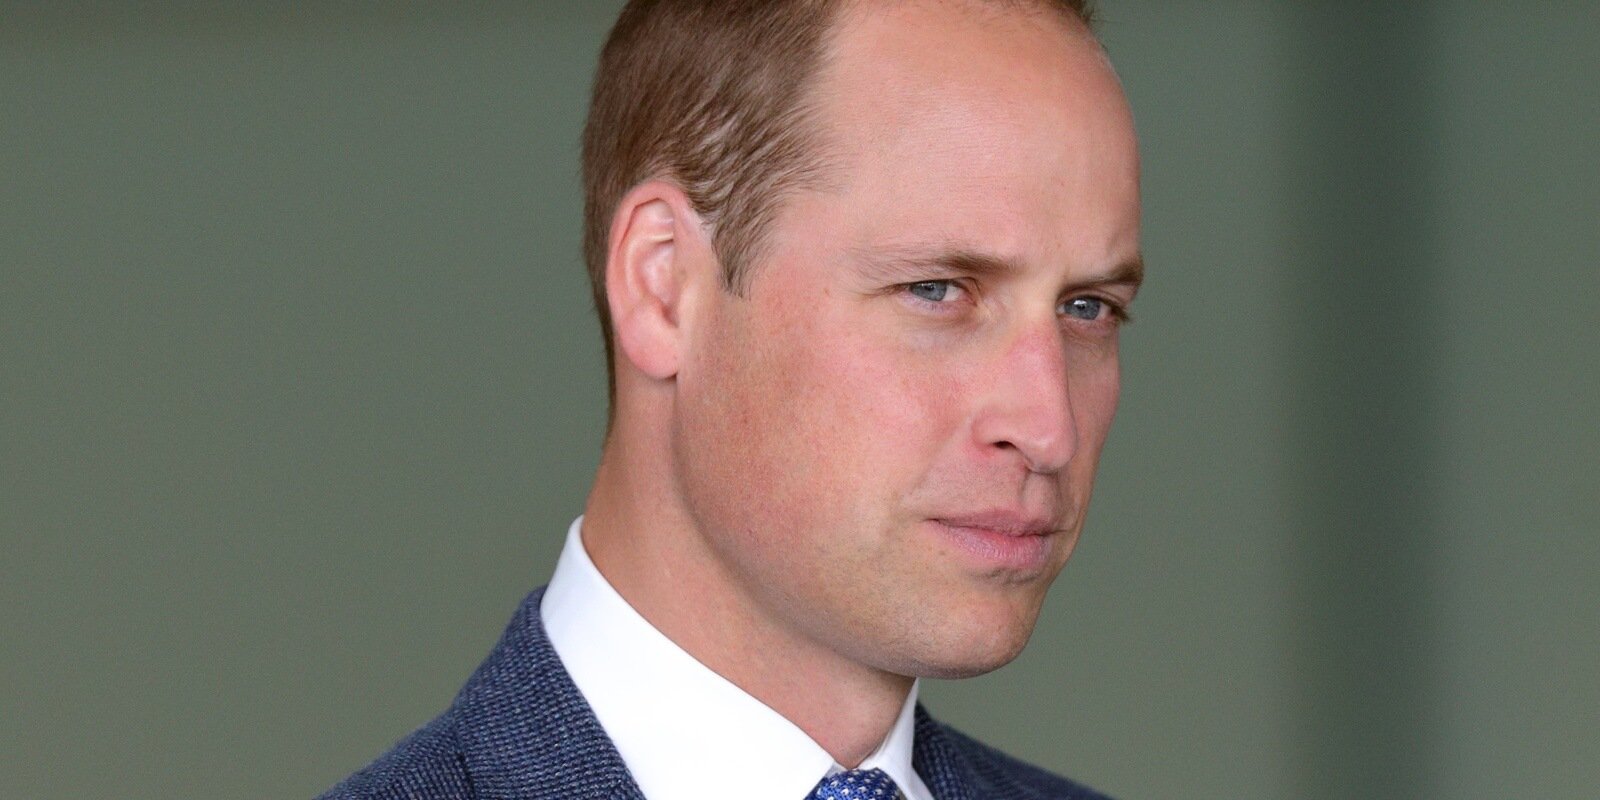 Prince William said that being a member of the royal family requires a bit of decorum.